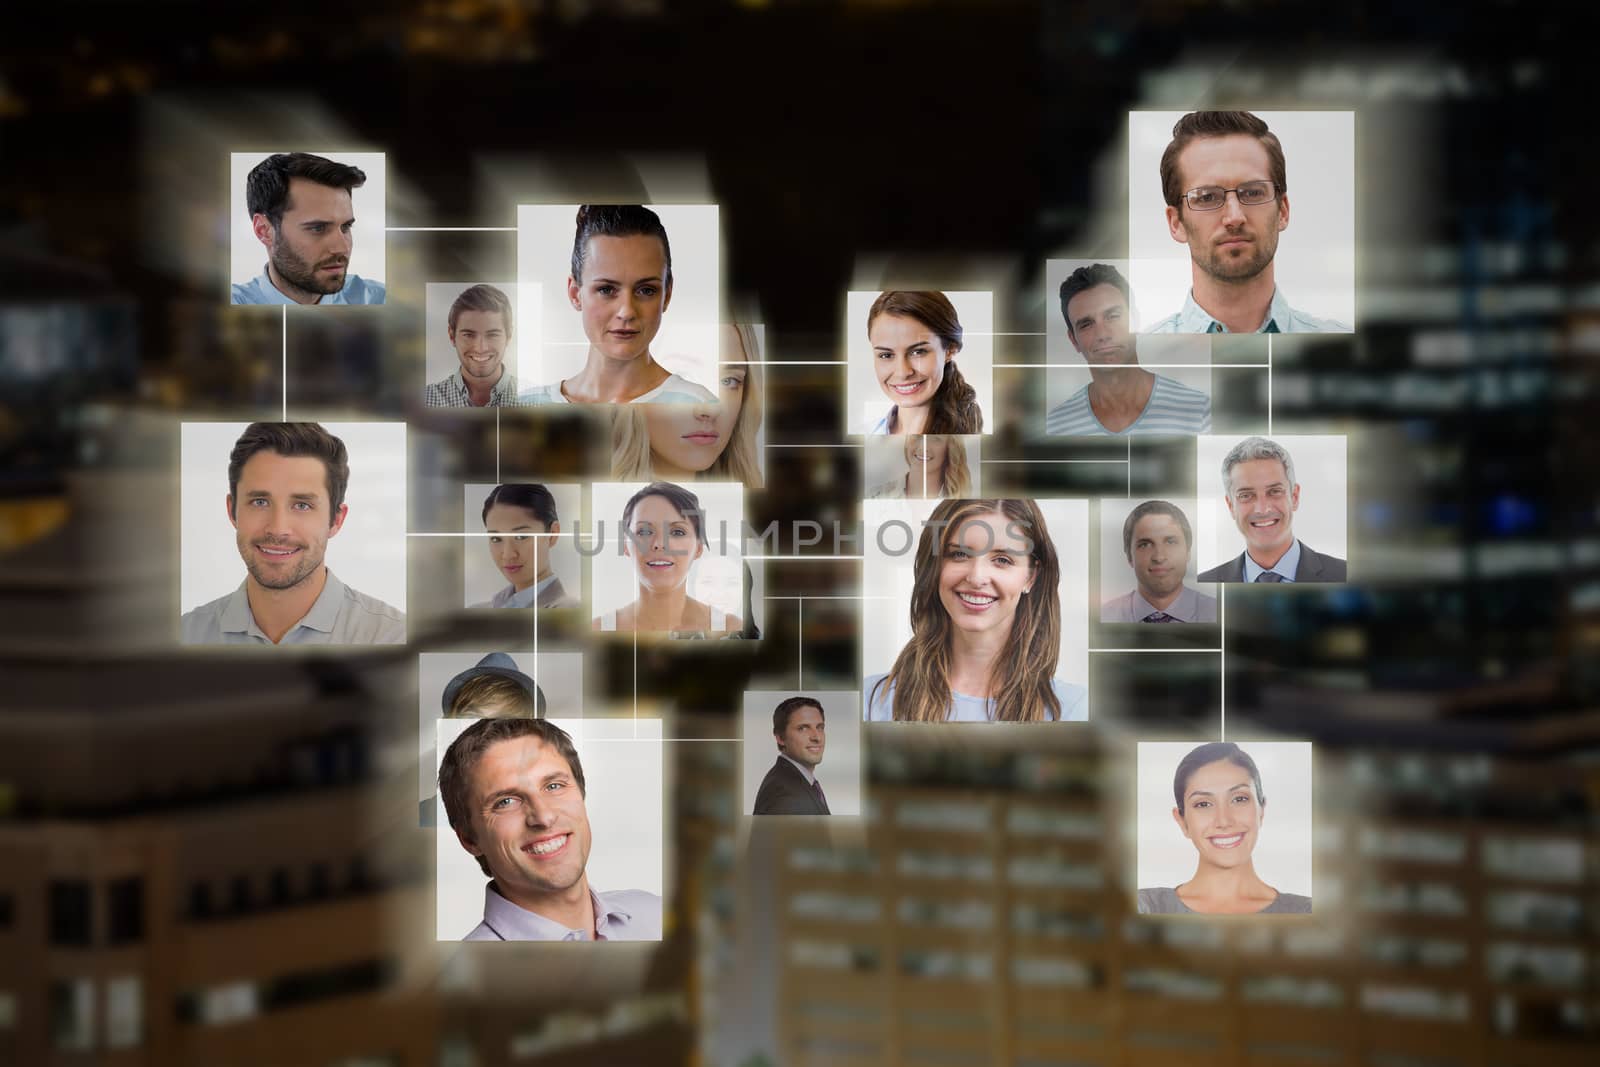 Composite image of connection between people by Wavebreakmedia